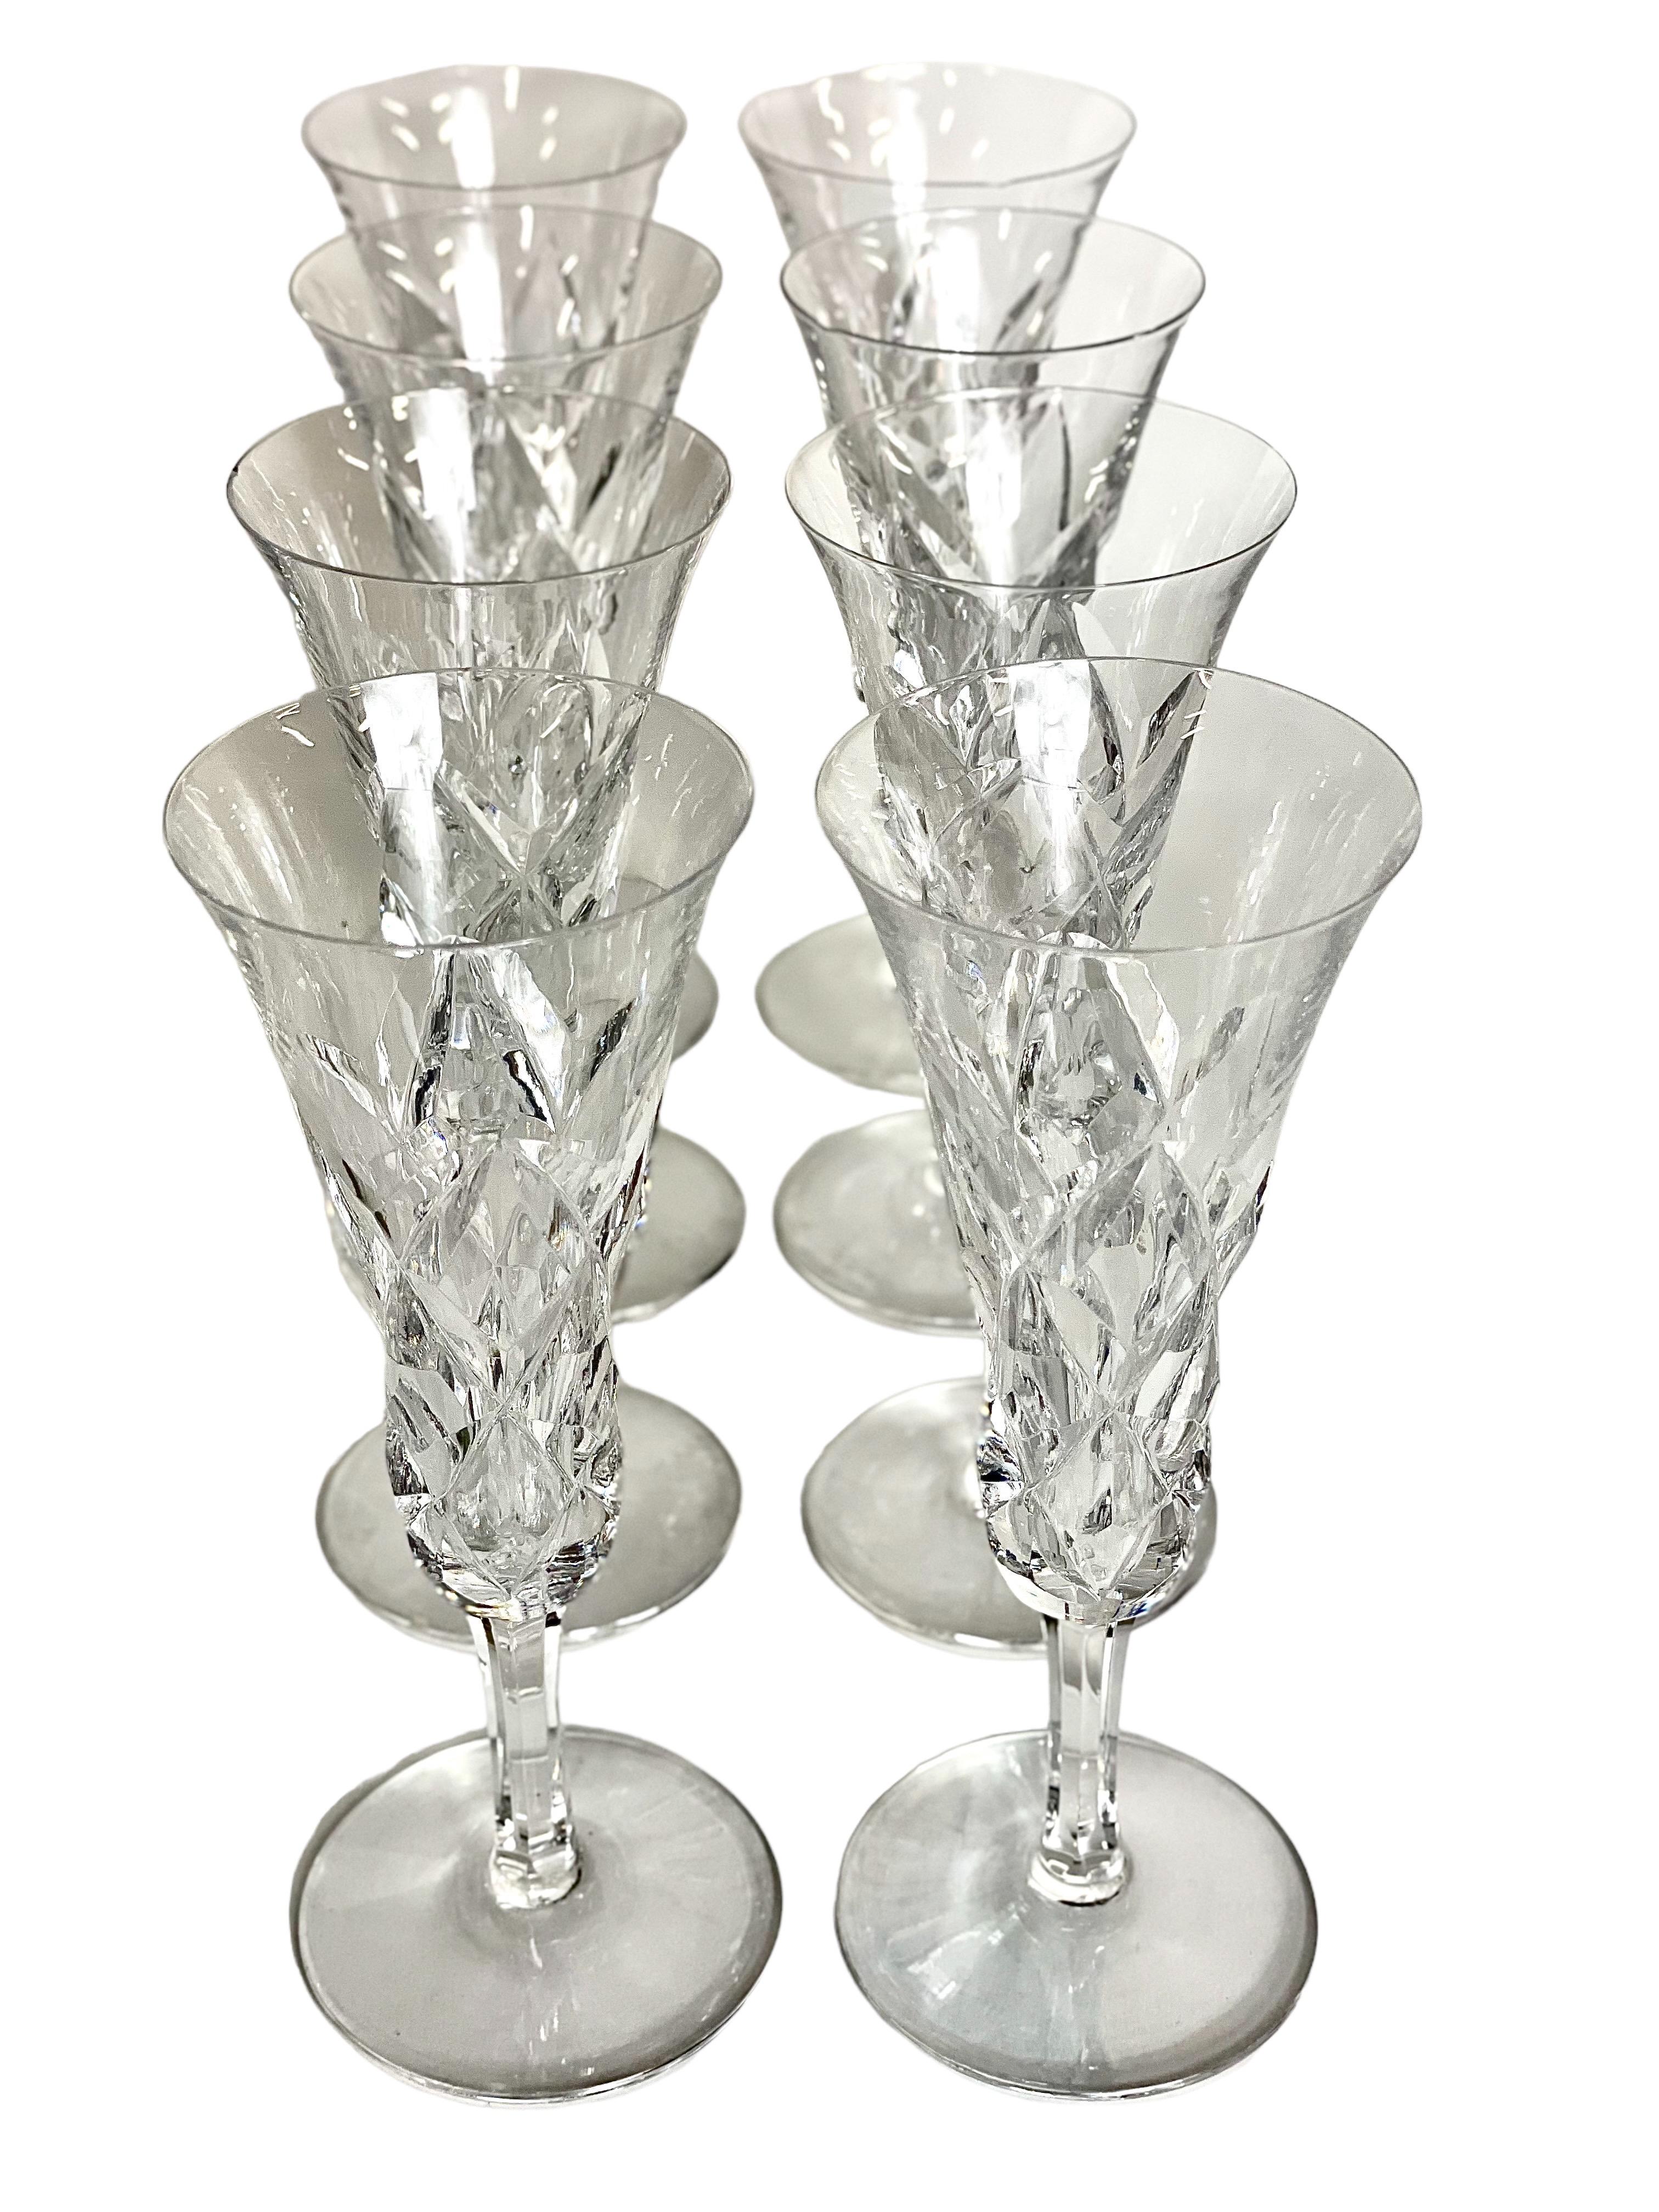 A glittering set of eight fine Saint Louis crystal Champagne flutes, from the 'Adour' pattern series. Dating from around 1950, these timeless glasses feature the classic Adour 'cross cut diamond' design on their body, with faceted stems and